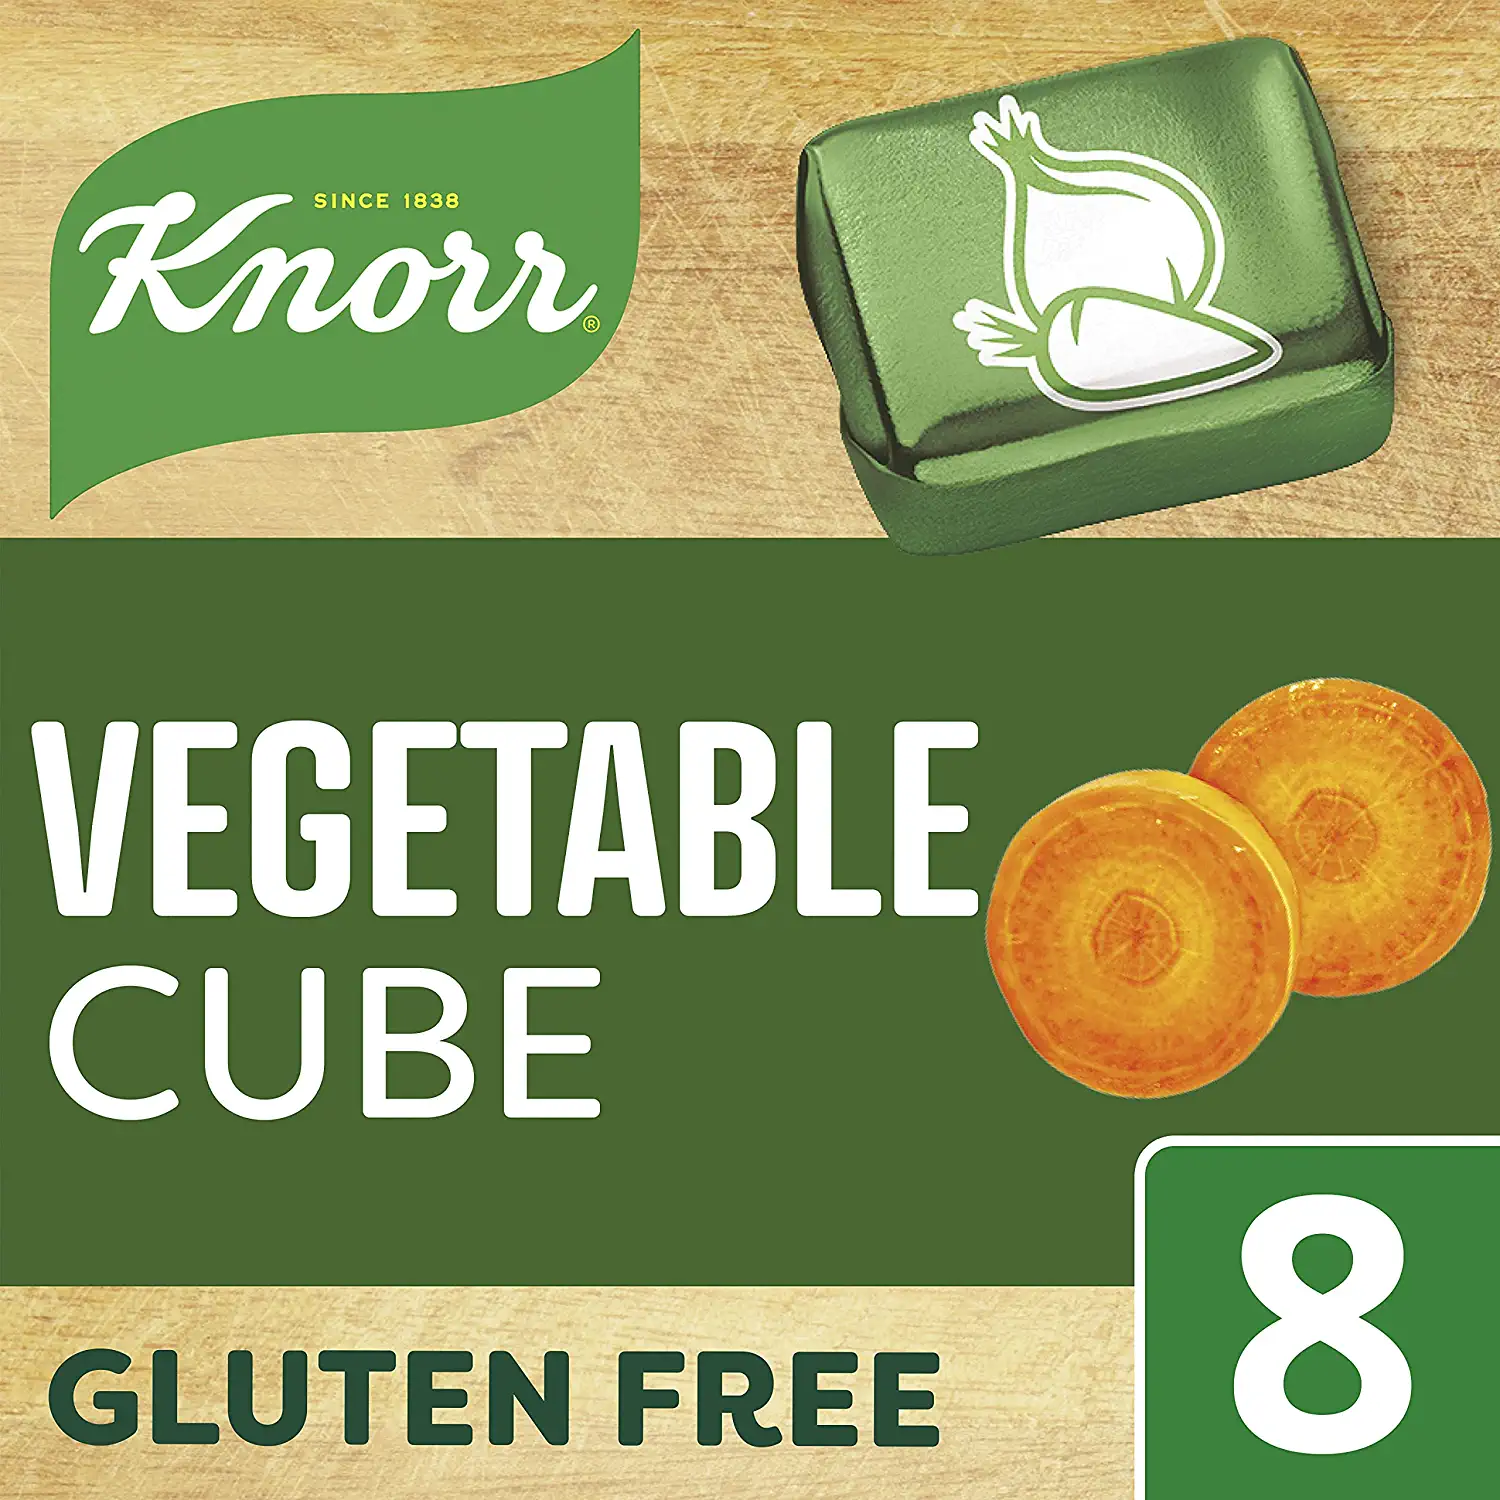  Knorr Lamb Stock Cubes 8 Pack 50g : Bouillons : Grocery &  Gourmet Food